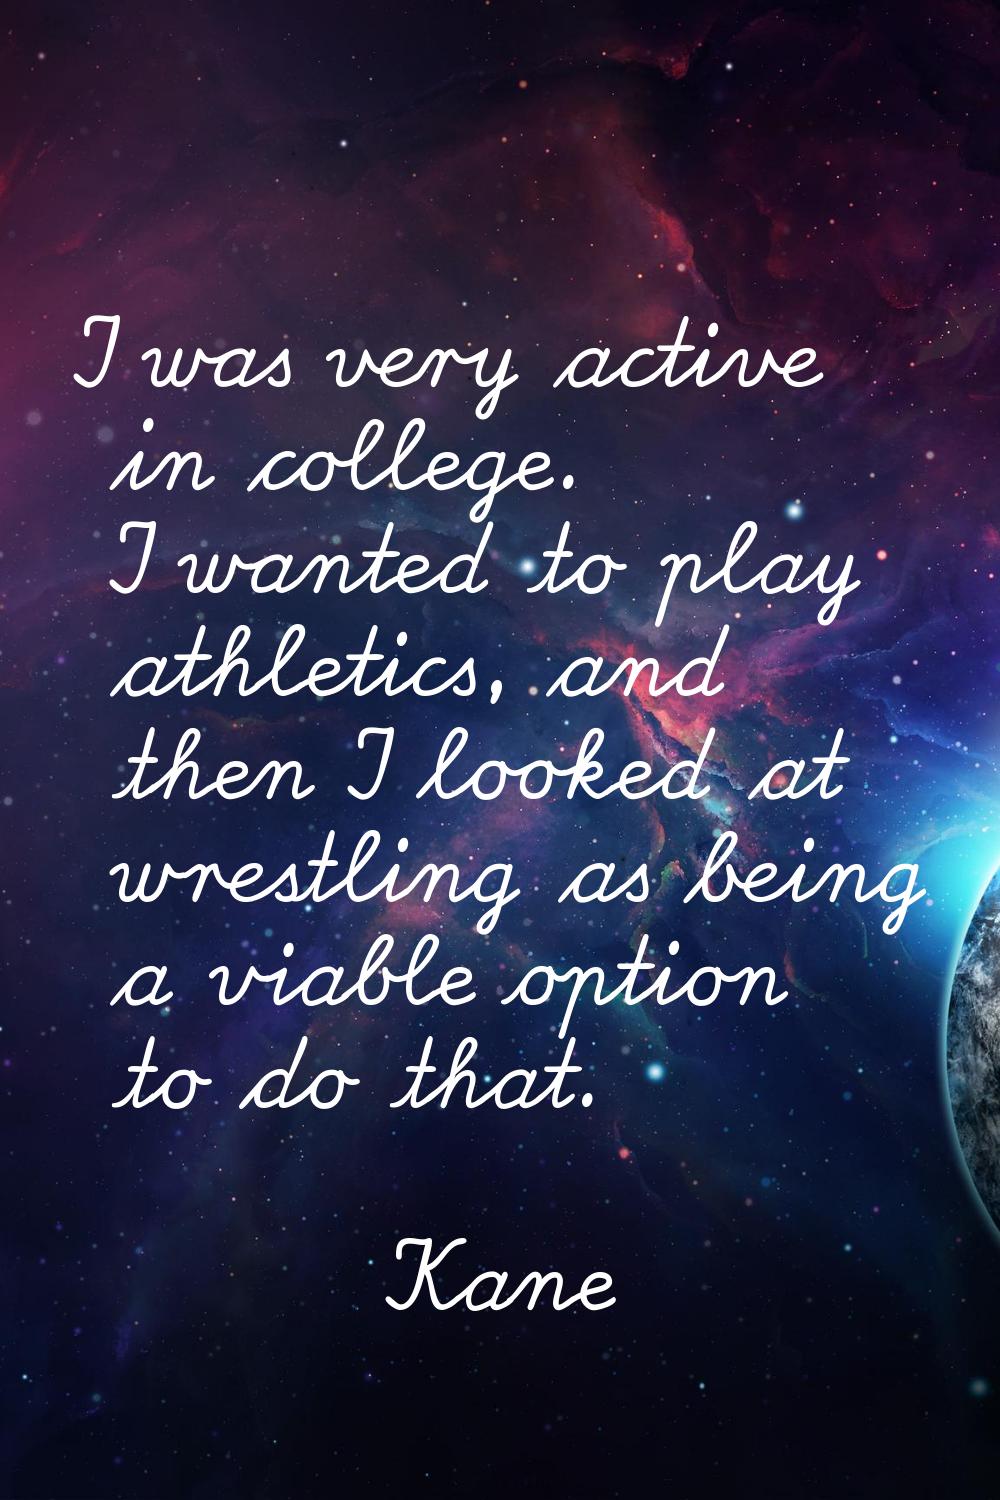 I was very active in college. I wanted to play athletics, and then I looked at wrestling as being a